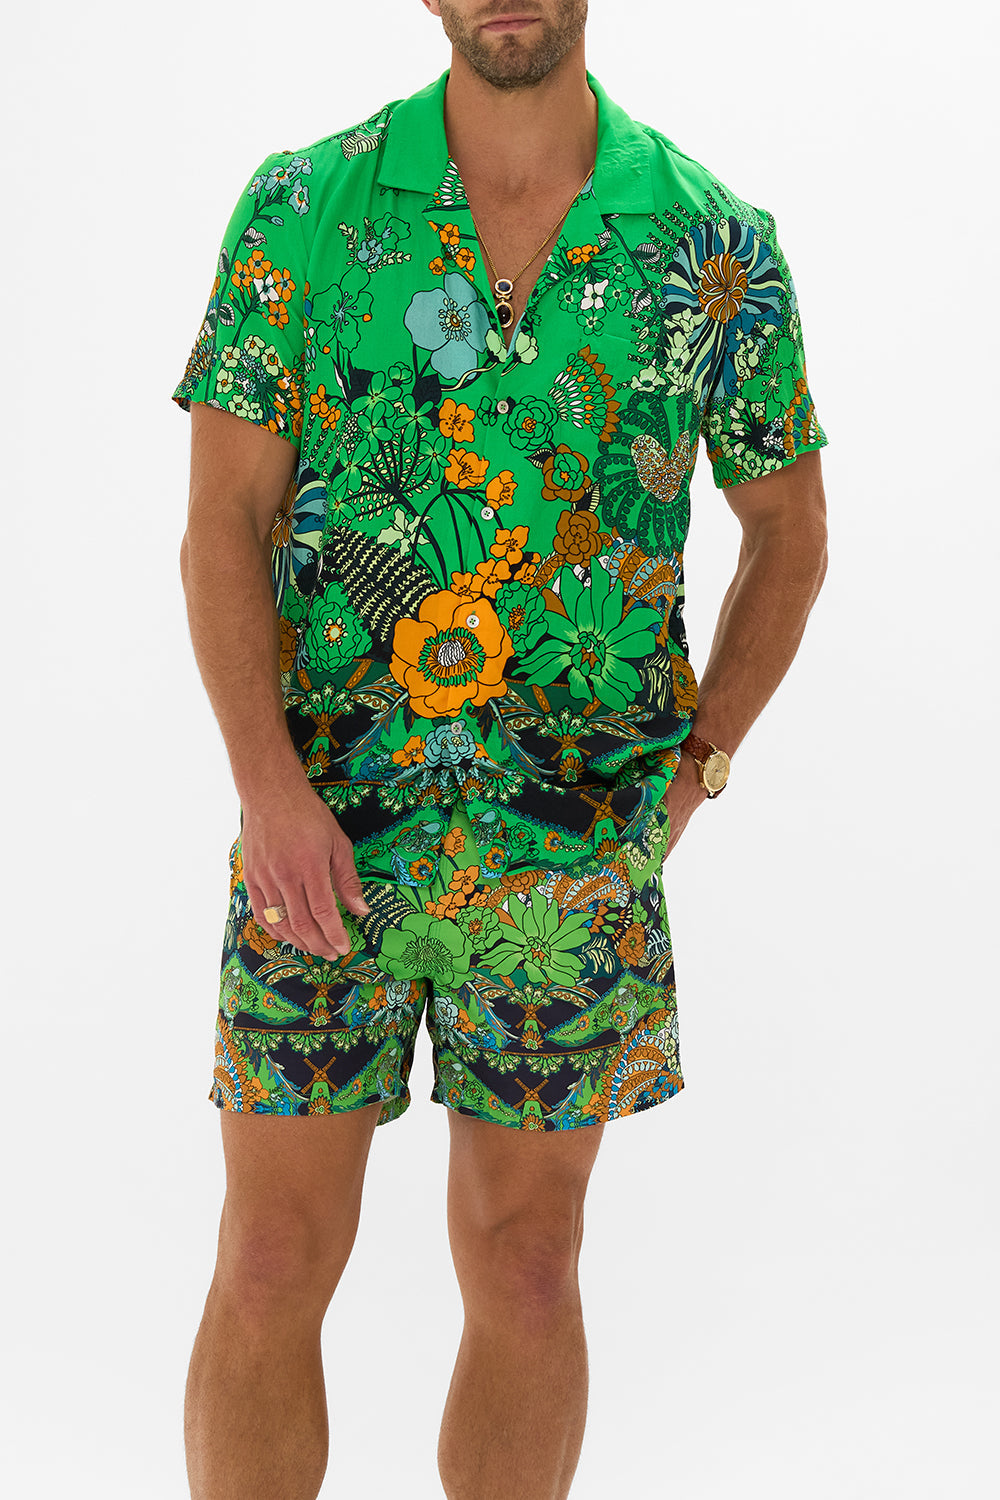 CAMILLA green short sleeve camp collared shirt in Good Vibes Generation